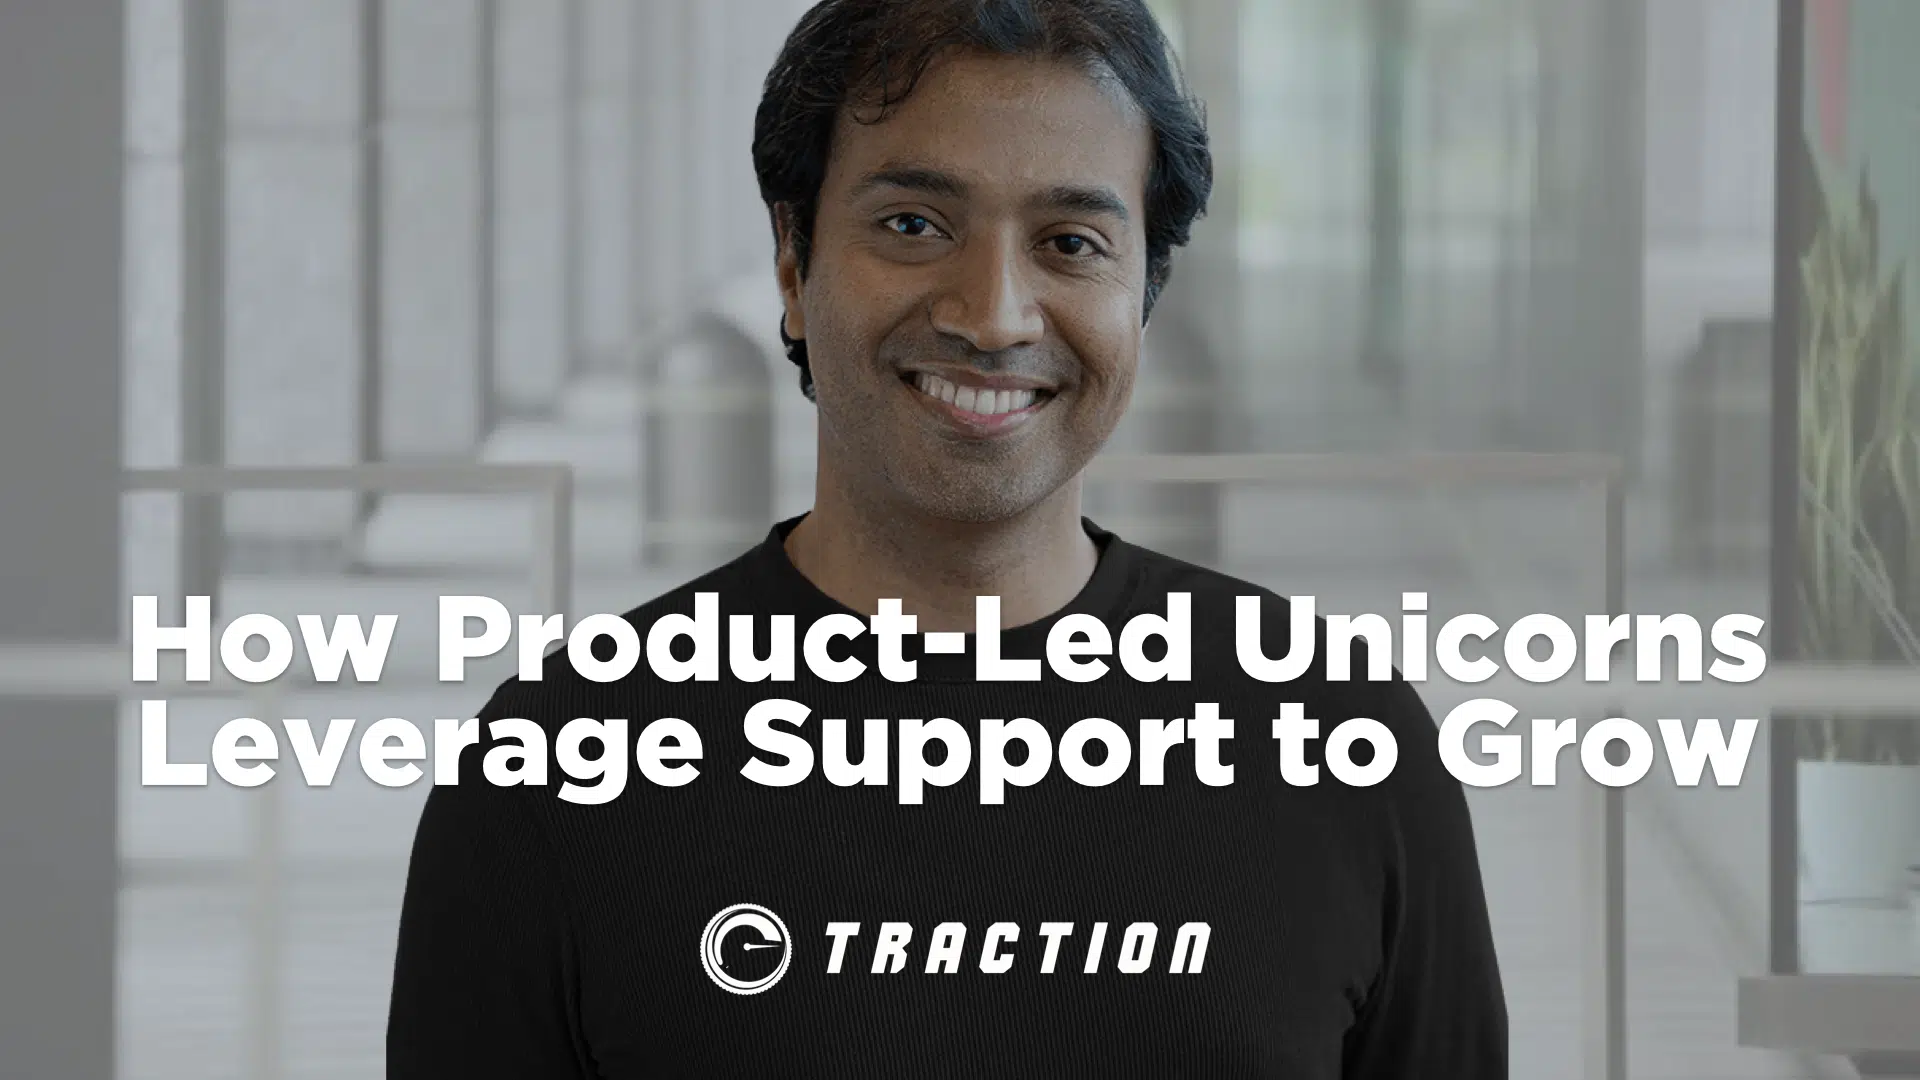 How Product-led Unicorns are Leveraging Support to Drive Growth